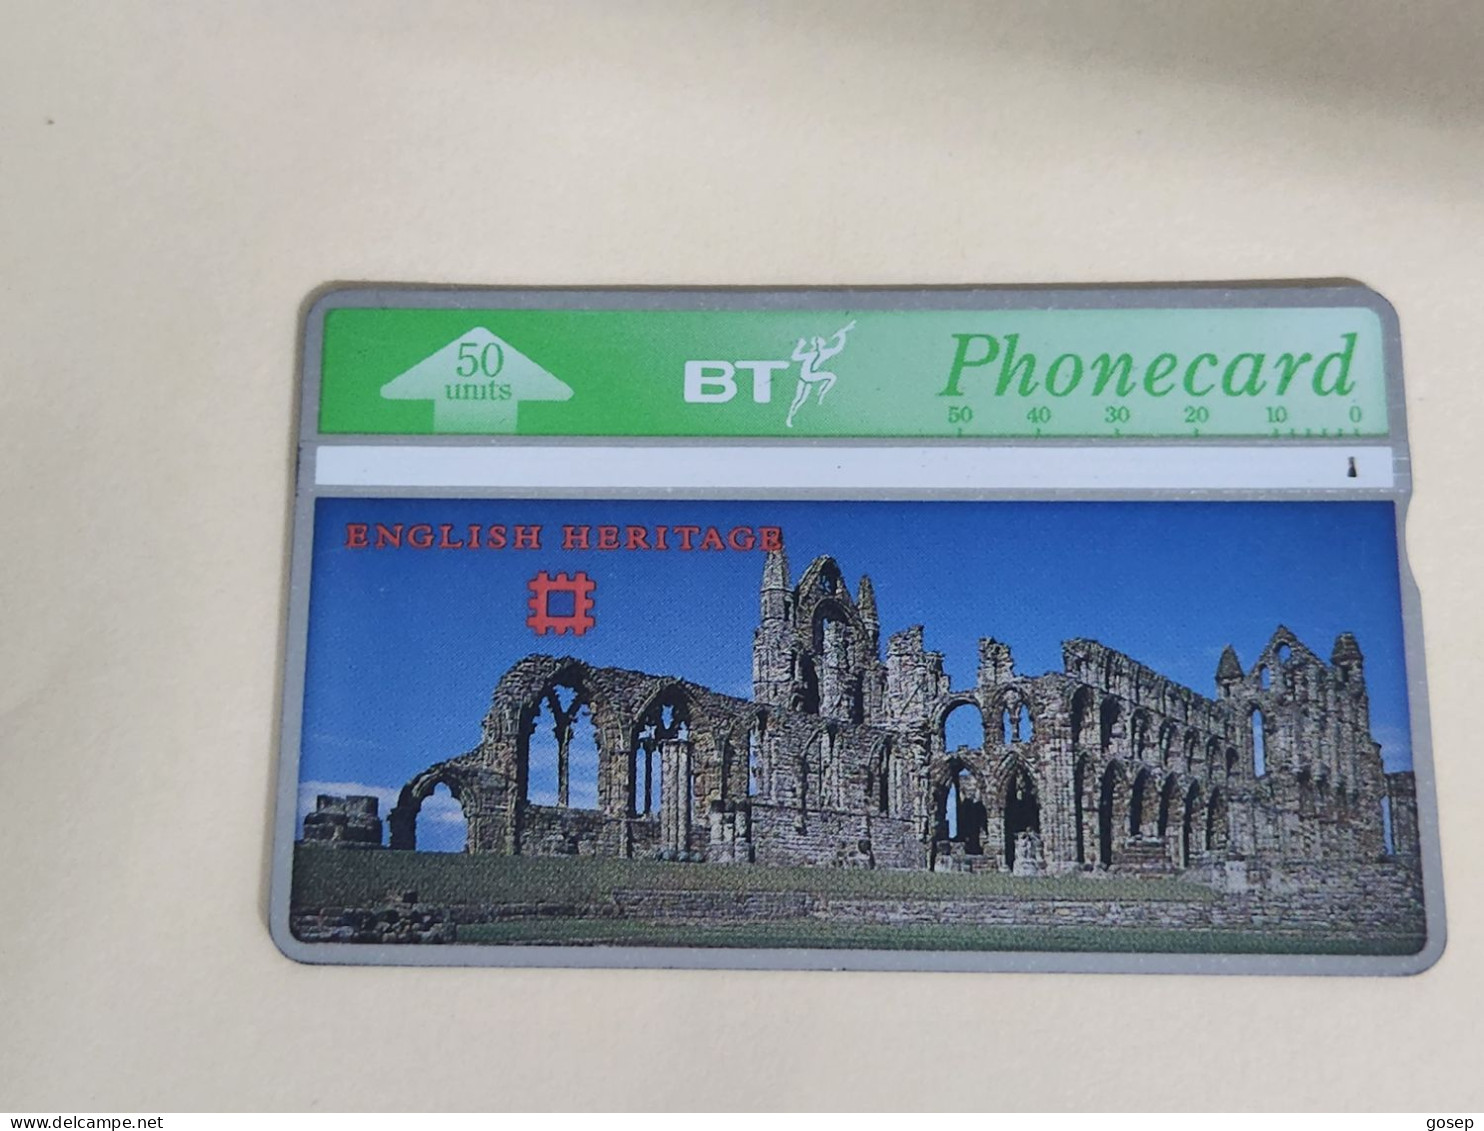 United Kingdom-(BTA112)-HERITAGE-Whitby Abbey-(195)(50units)(528D77140)price Cataloge3.00£-used+1card Prepiad Free - BT Advertising Issues